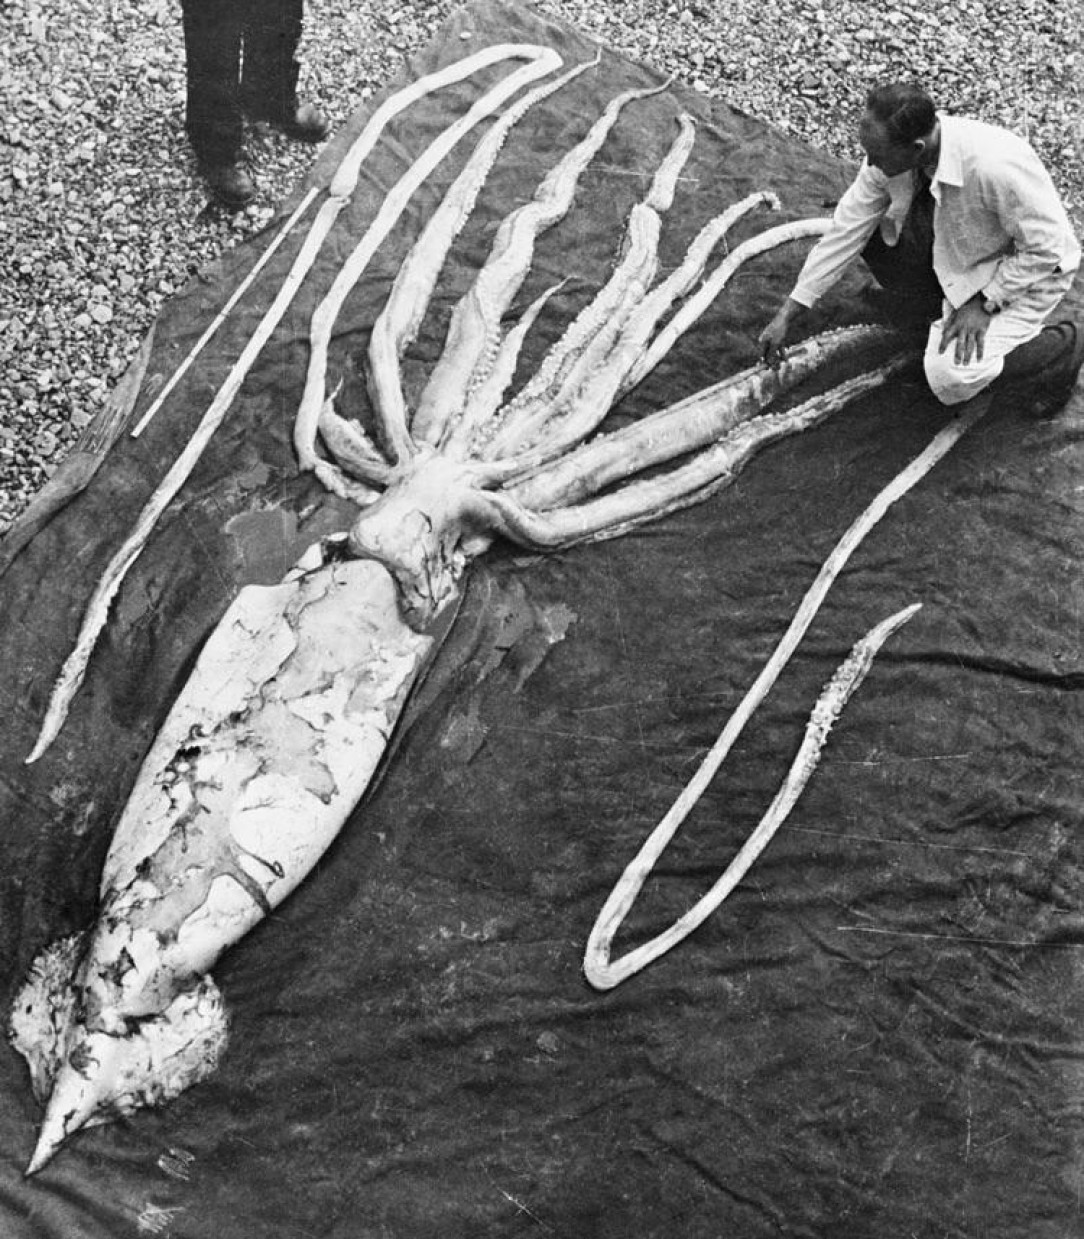 A 9 meter long Giant Squid specimen, which washed ashore in Norway. It is also a case of deep sea gigantism